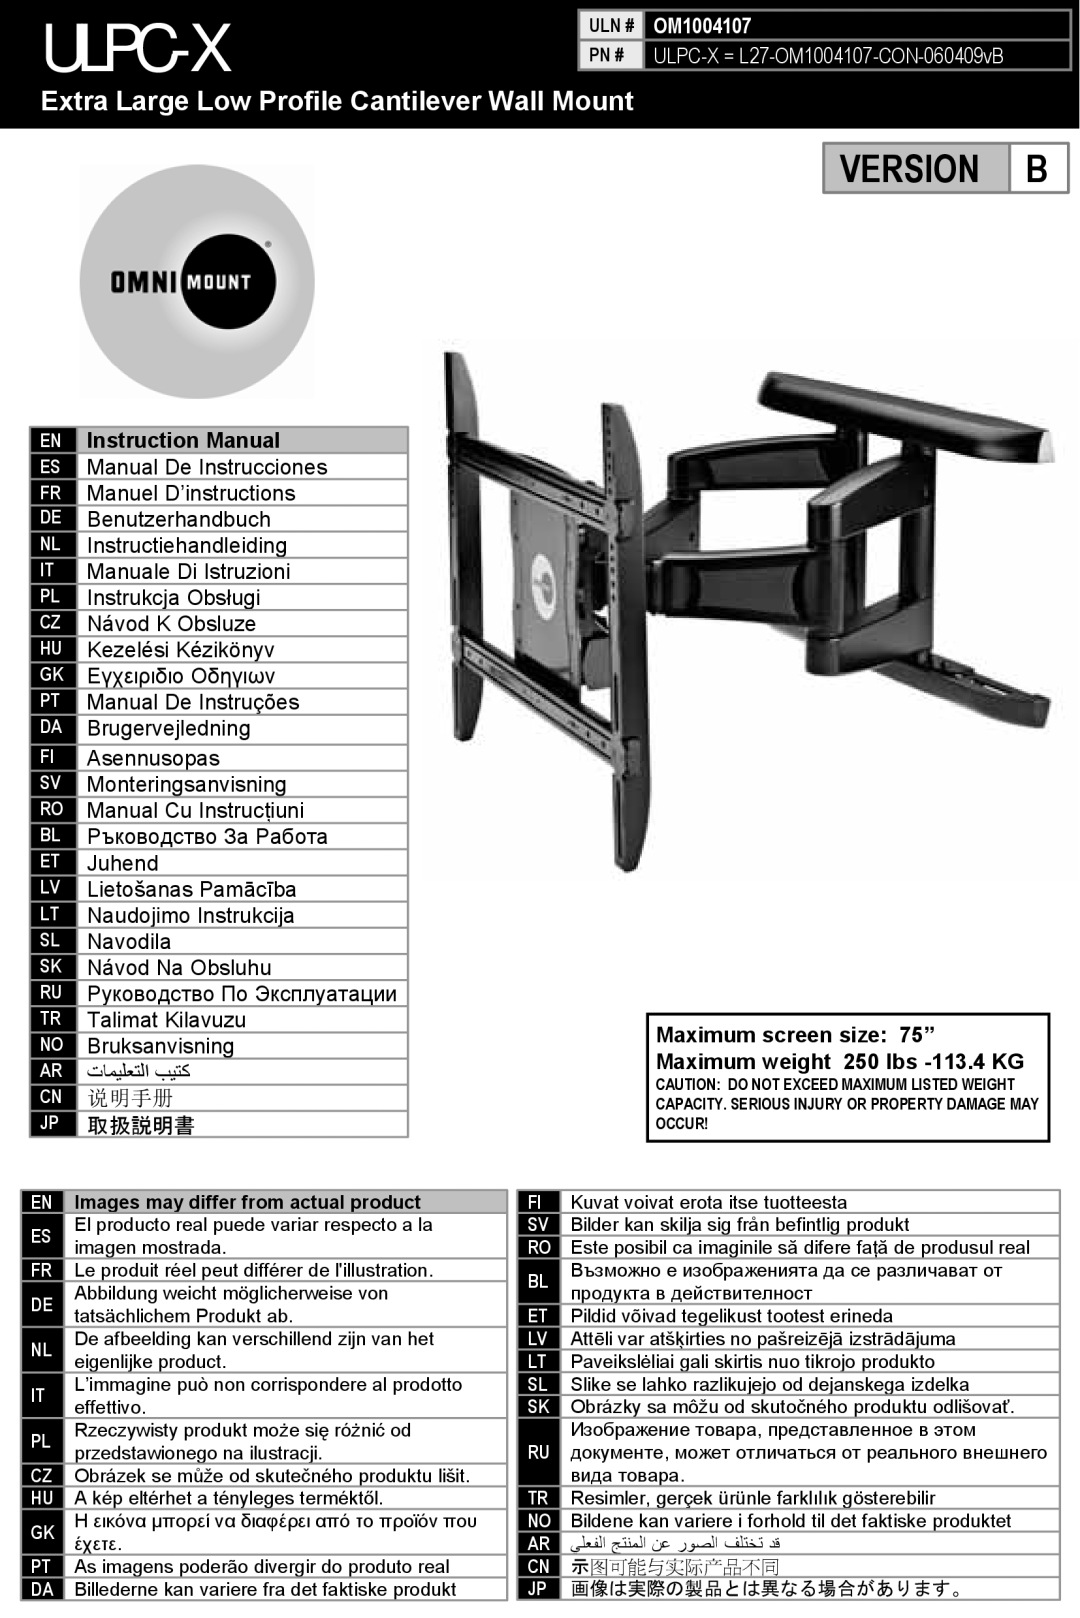 Omnimount OM1004107 manual Extra Large Low Profile Cantilever Wall Mount, Maximum screen size 75”, Ulpc-X, Version, 说明手册 